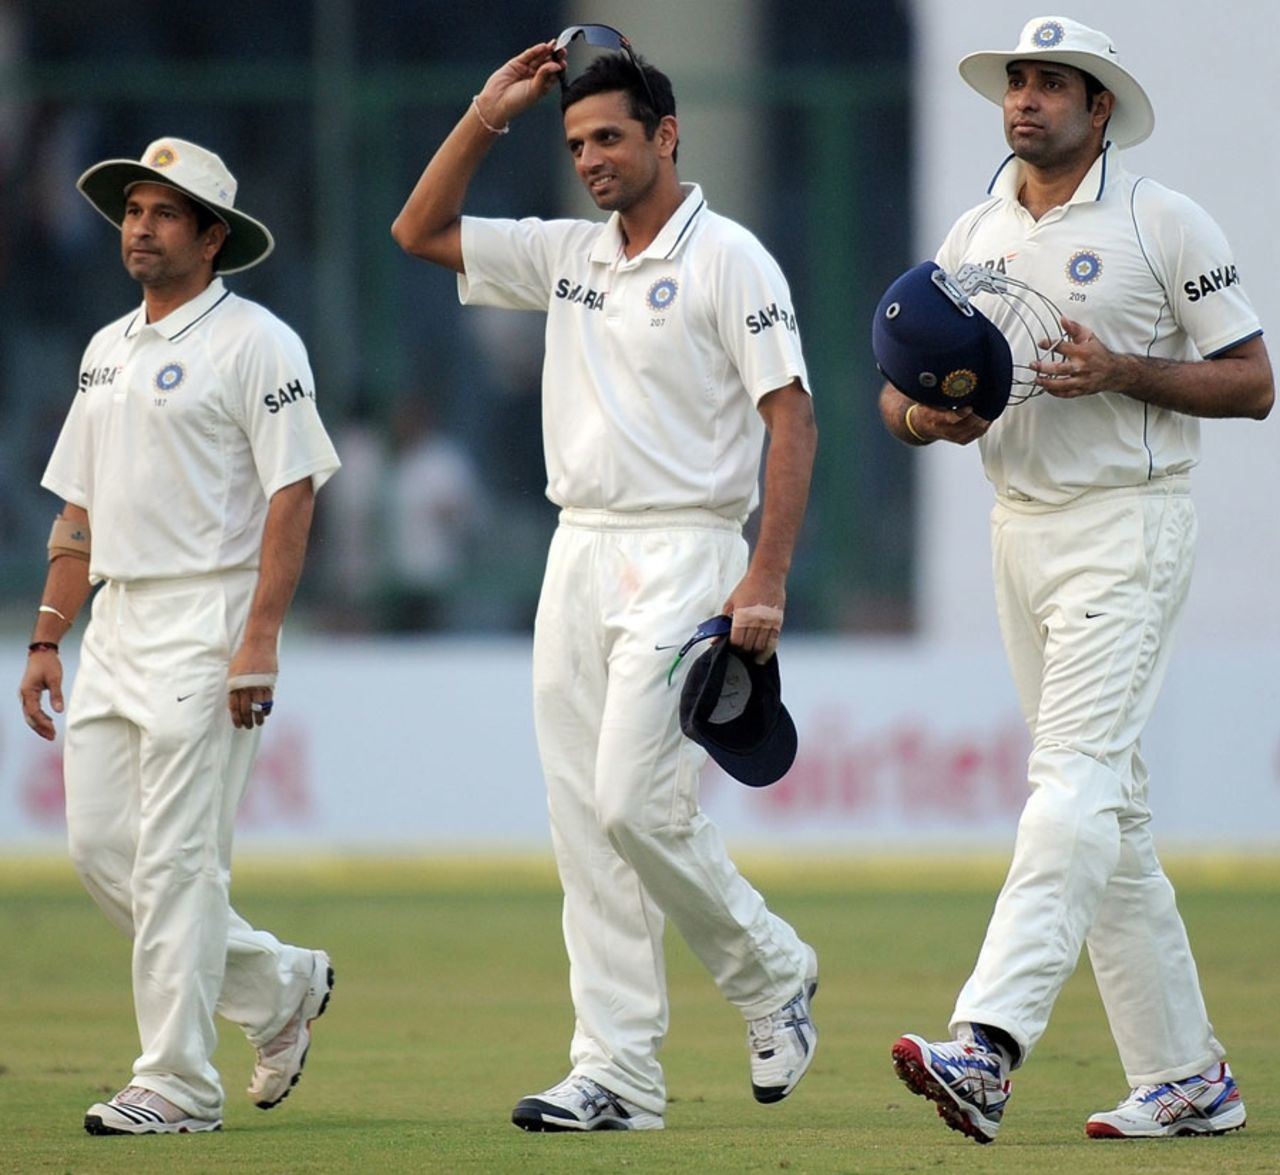 Sachin Tendulkar, Rahul Dravid and VVS Laxman walk off the field at the end of the day's play, India v West Indies, 1st Test, 2nd day, Delhi, November 7, 2011